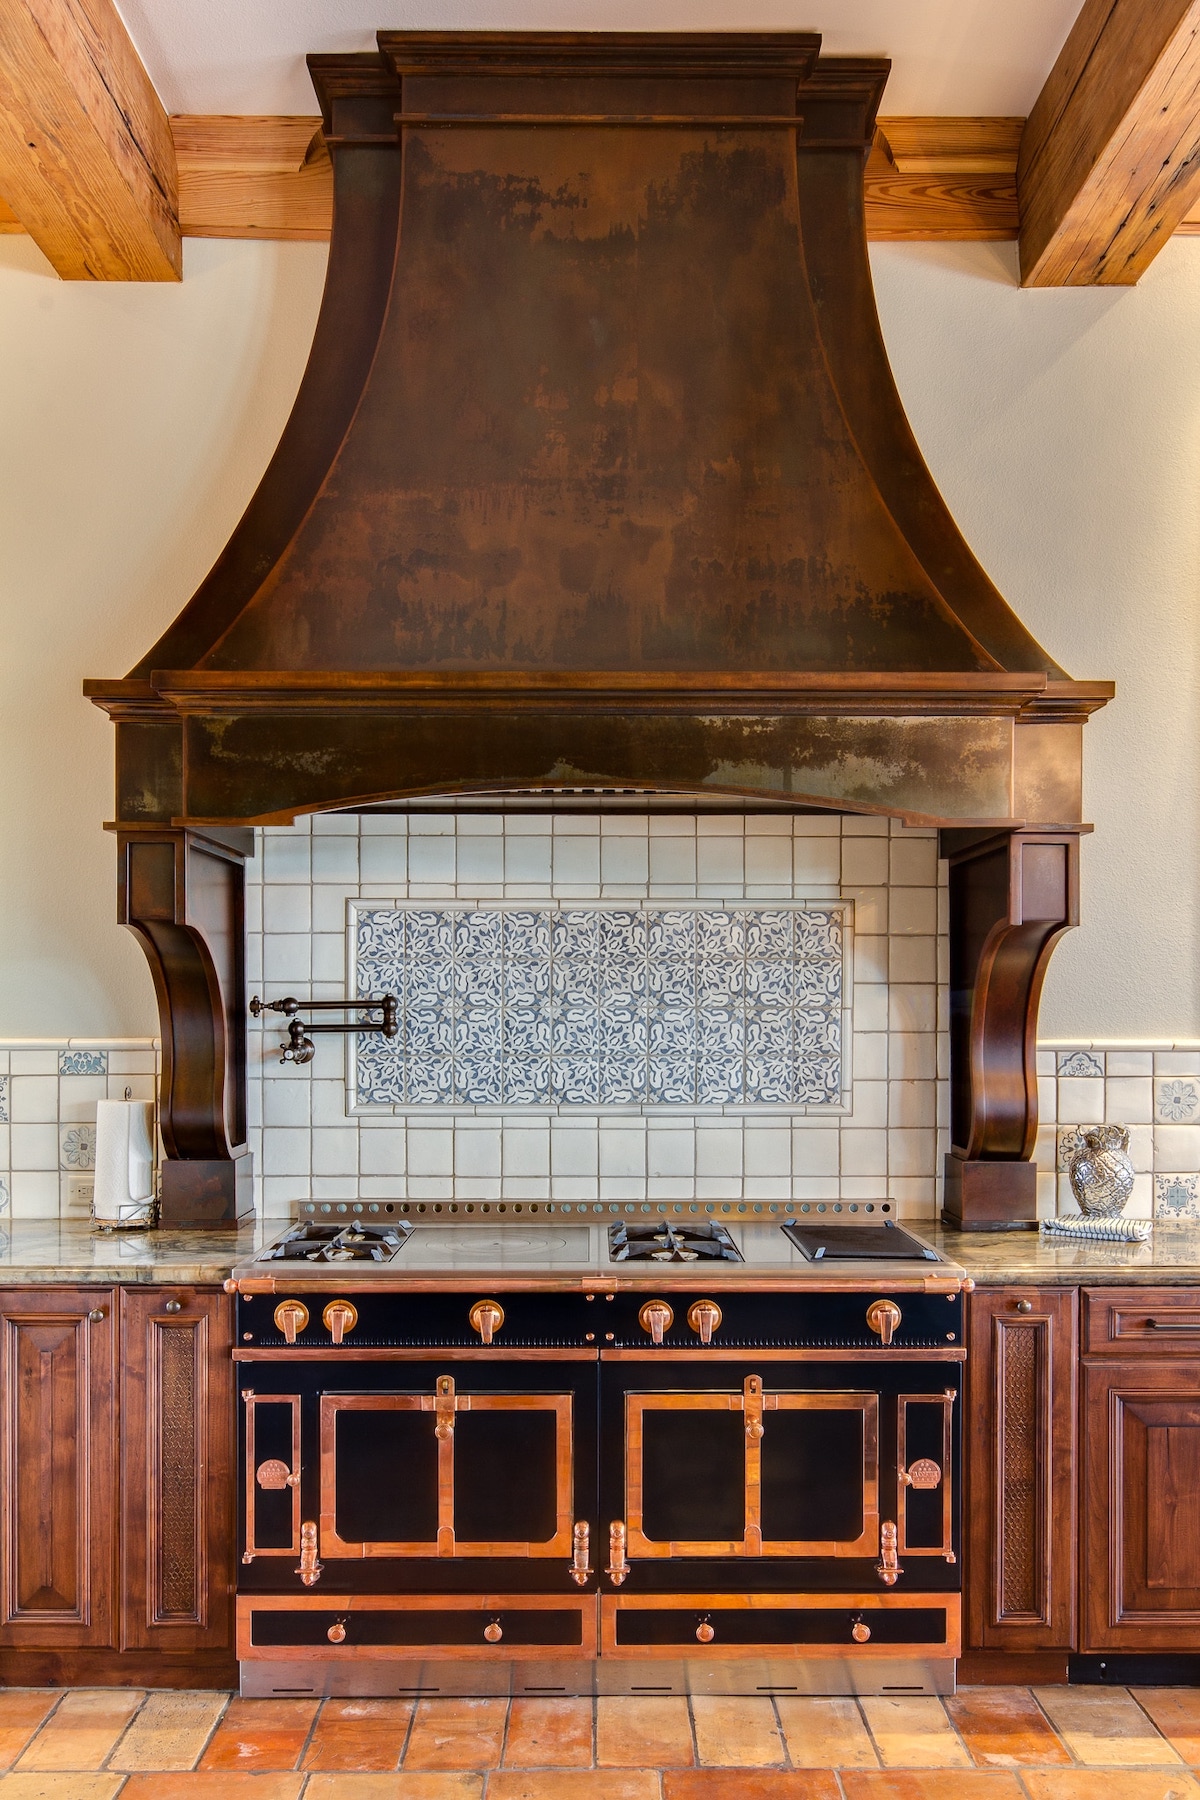 A rustic, oversized range hood in a medieval European–style kitchen.